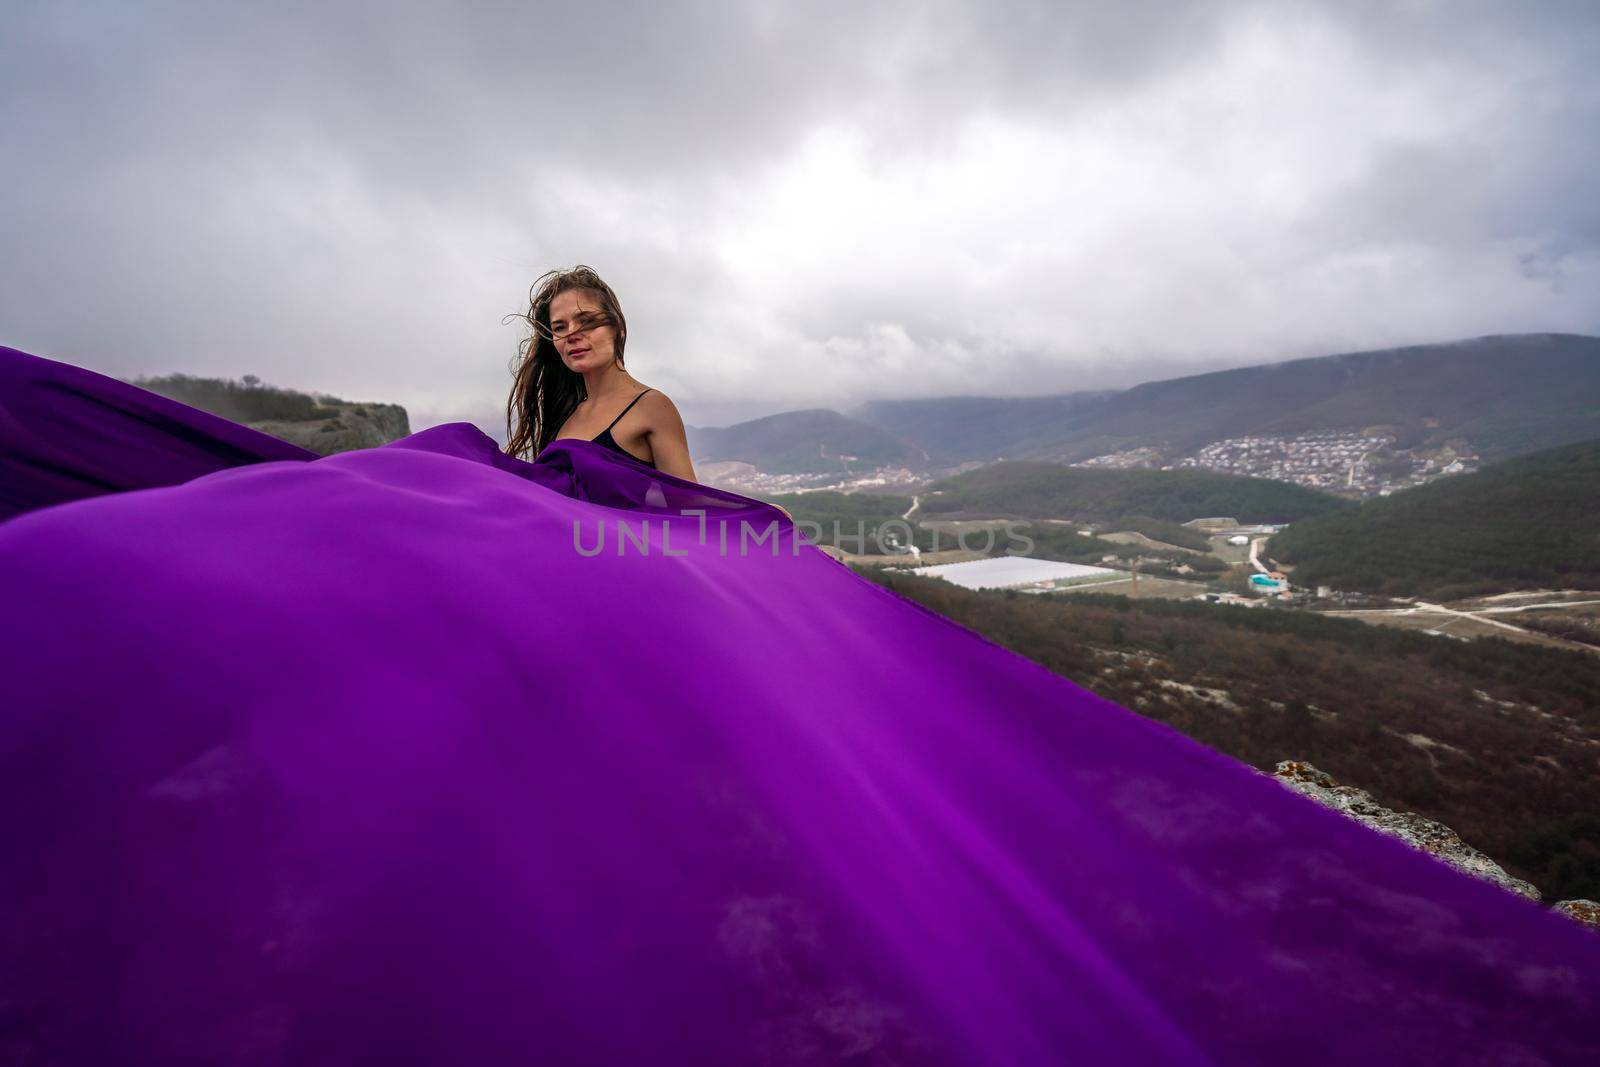 A woman with long hair is standing in a purple flowing dress with a flowing fabric. On the mountain against the background of the sky with clouds. by Matiunina